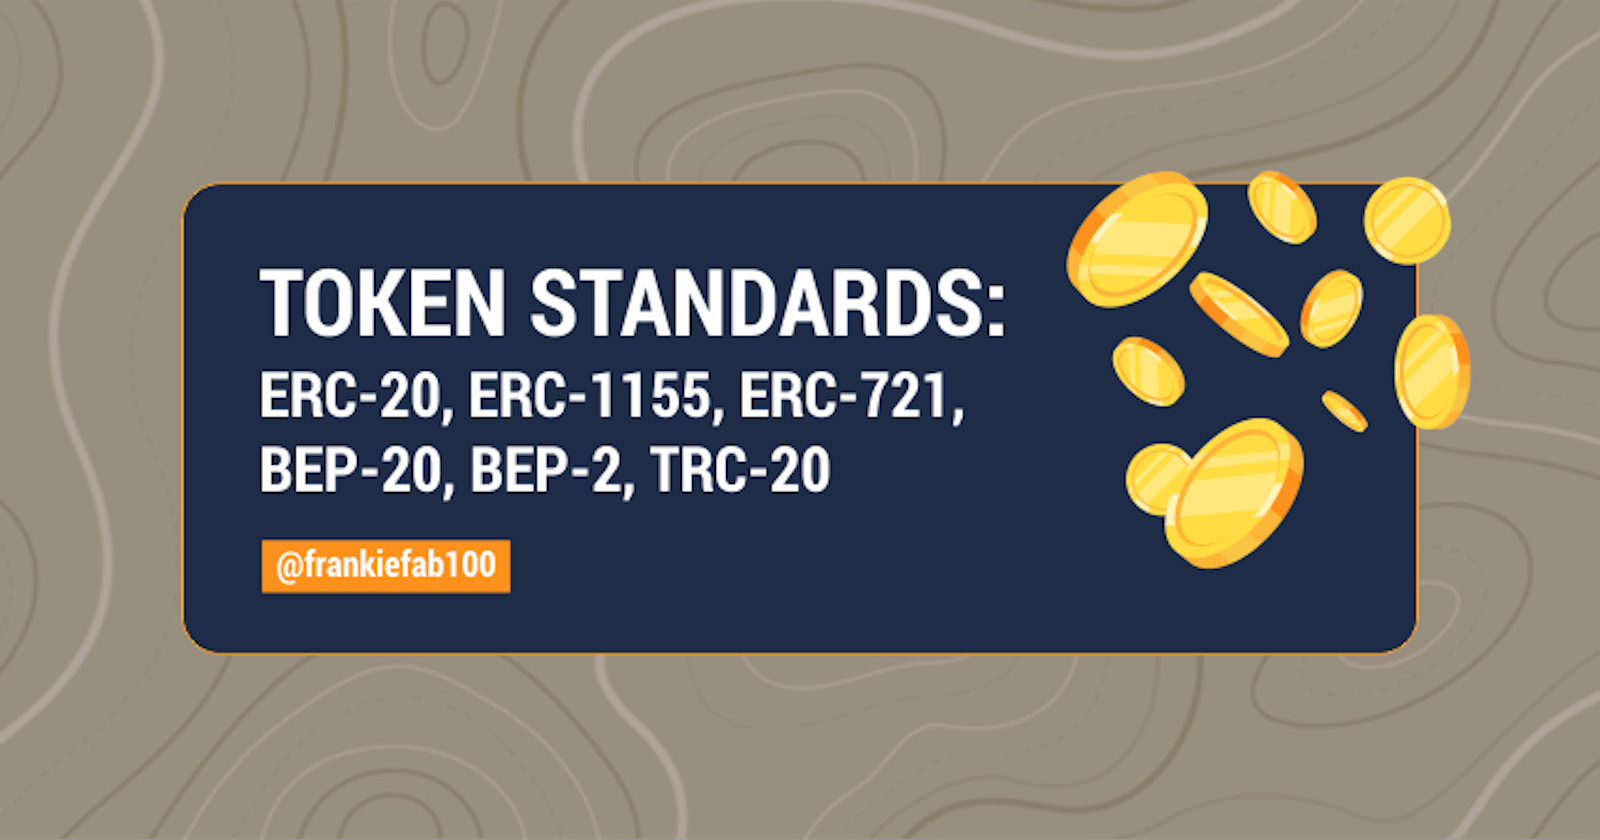 Token Standards: Everything You Need To Know